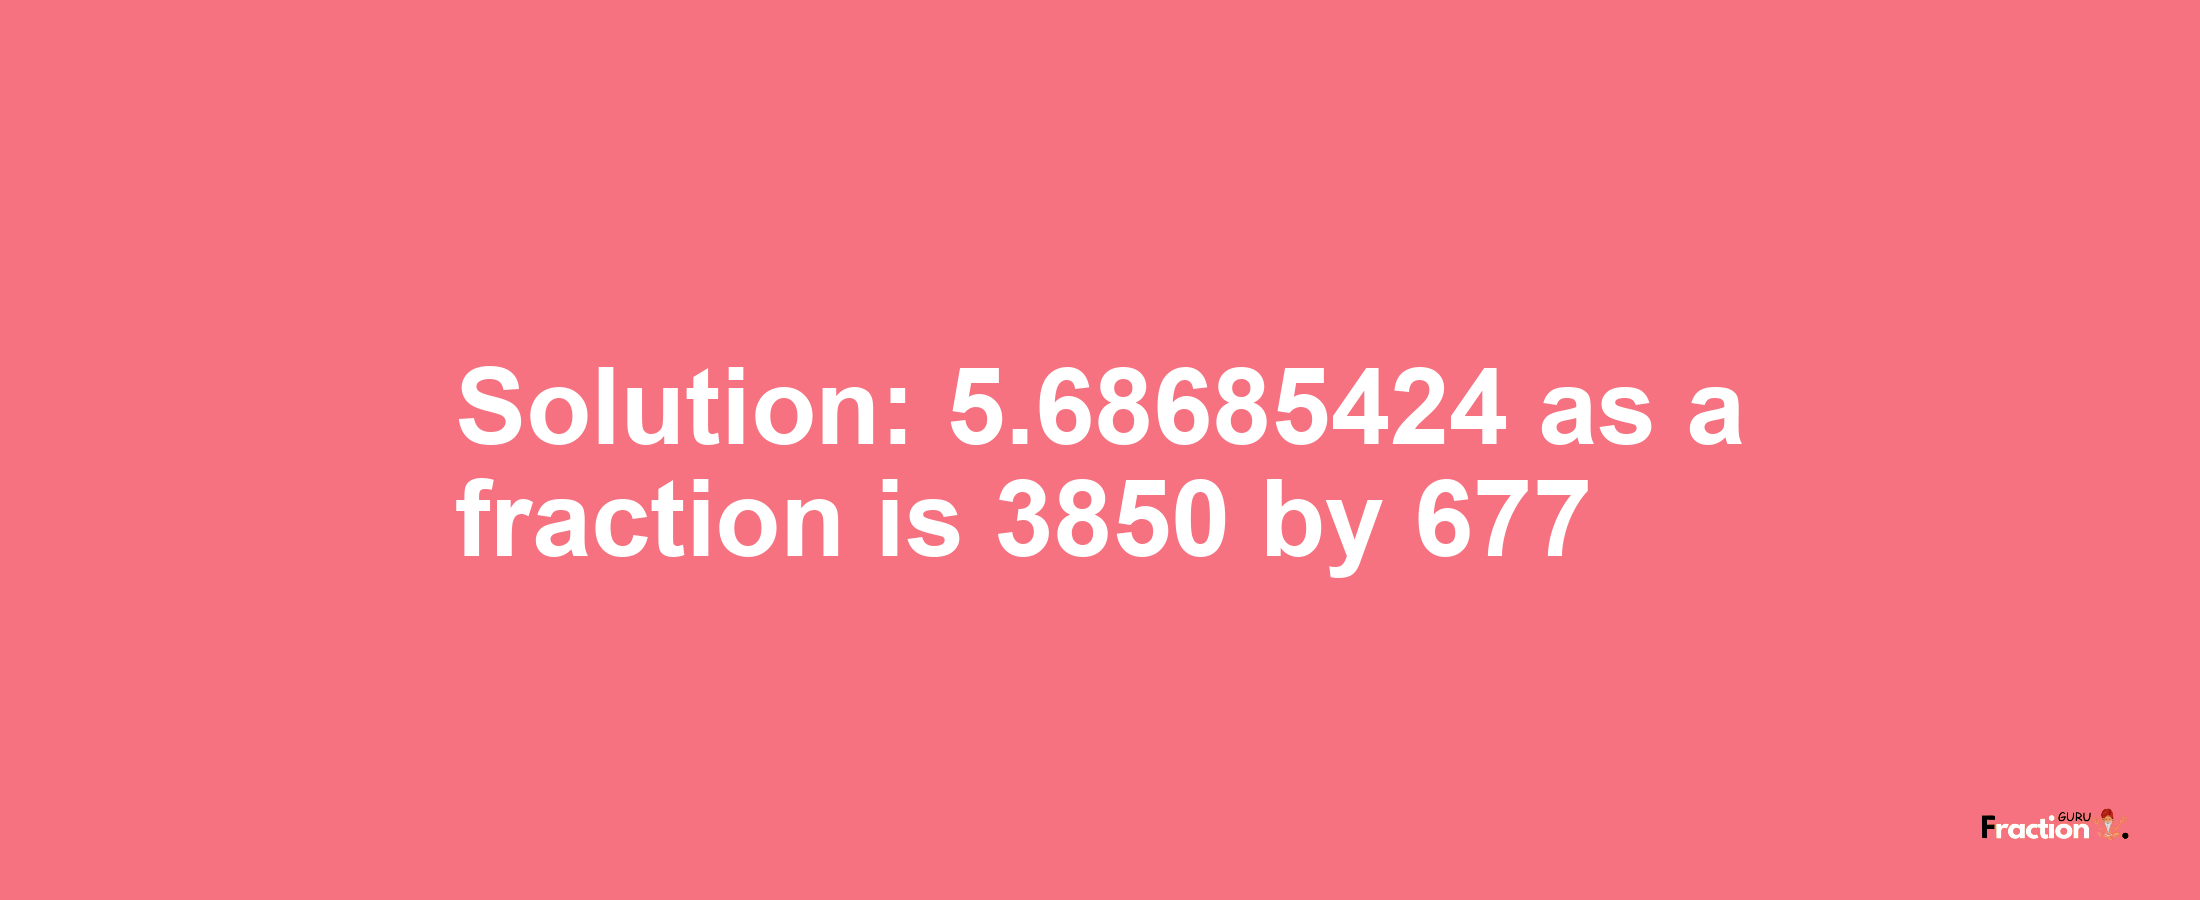 Solution:5.68685424 as a fraction is 3850/677